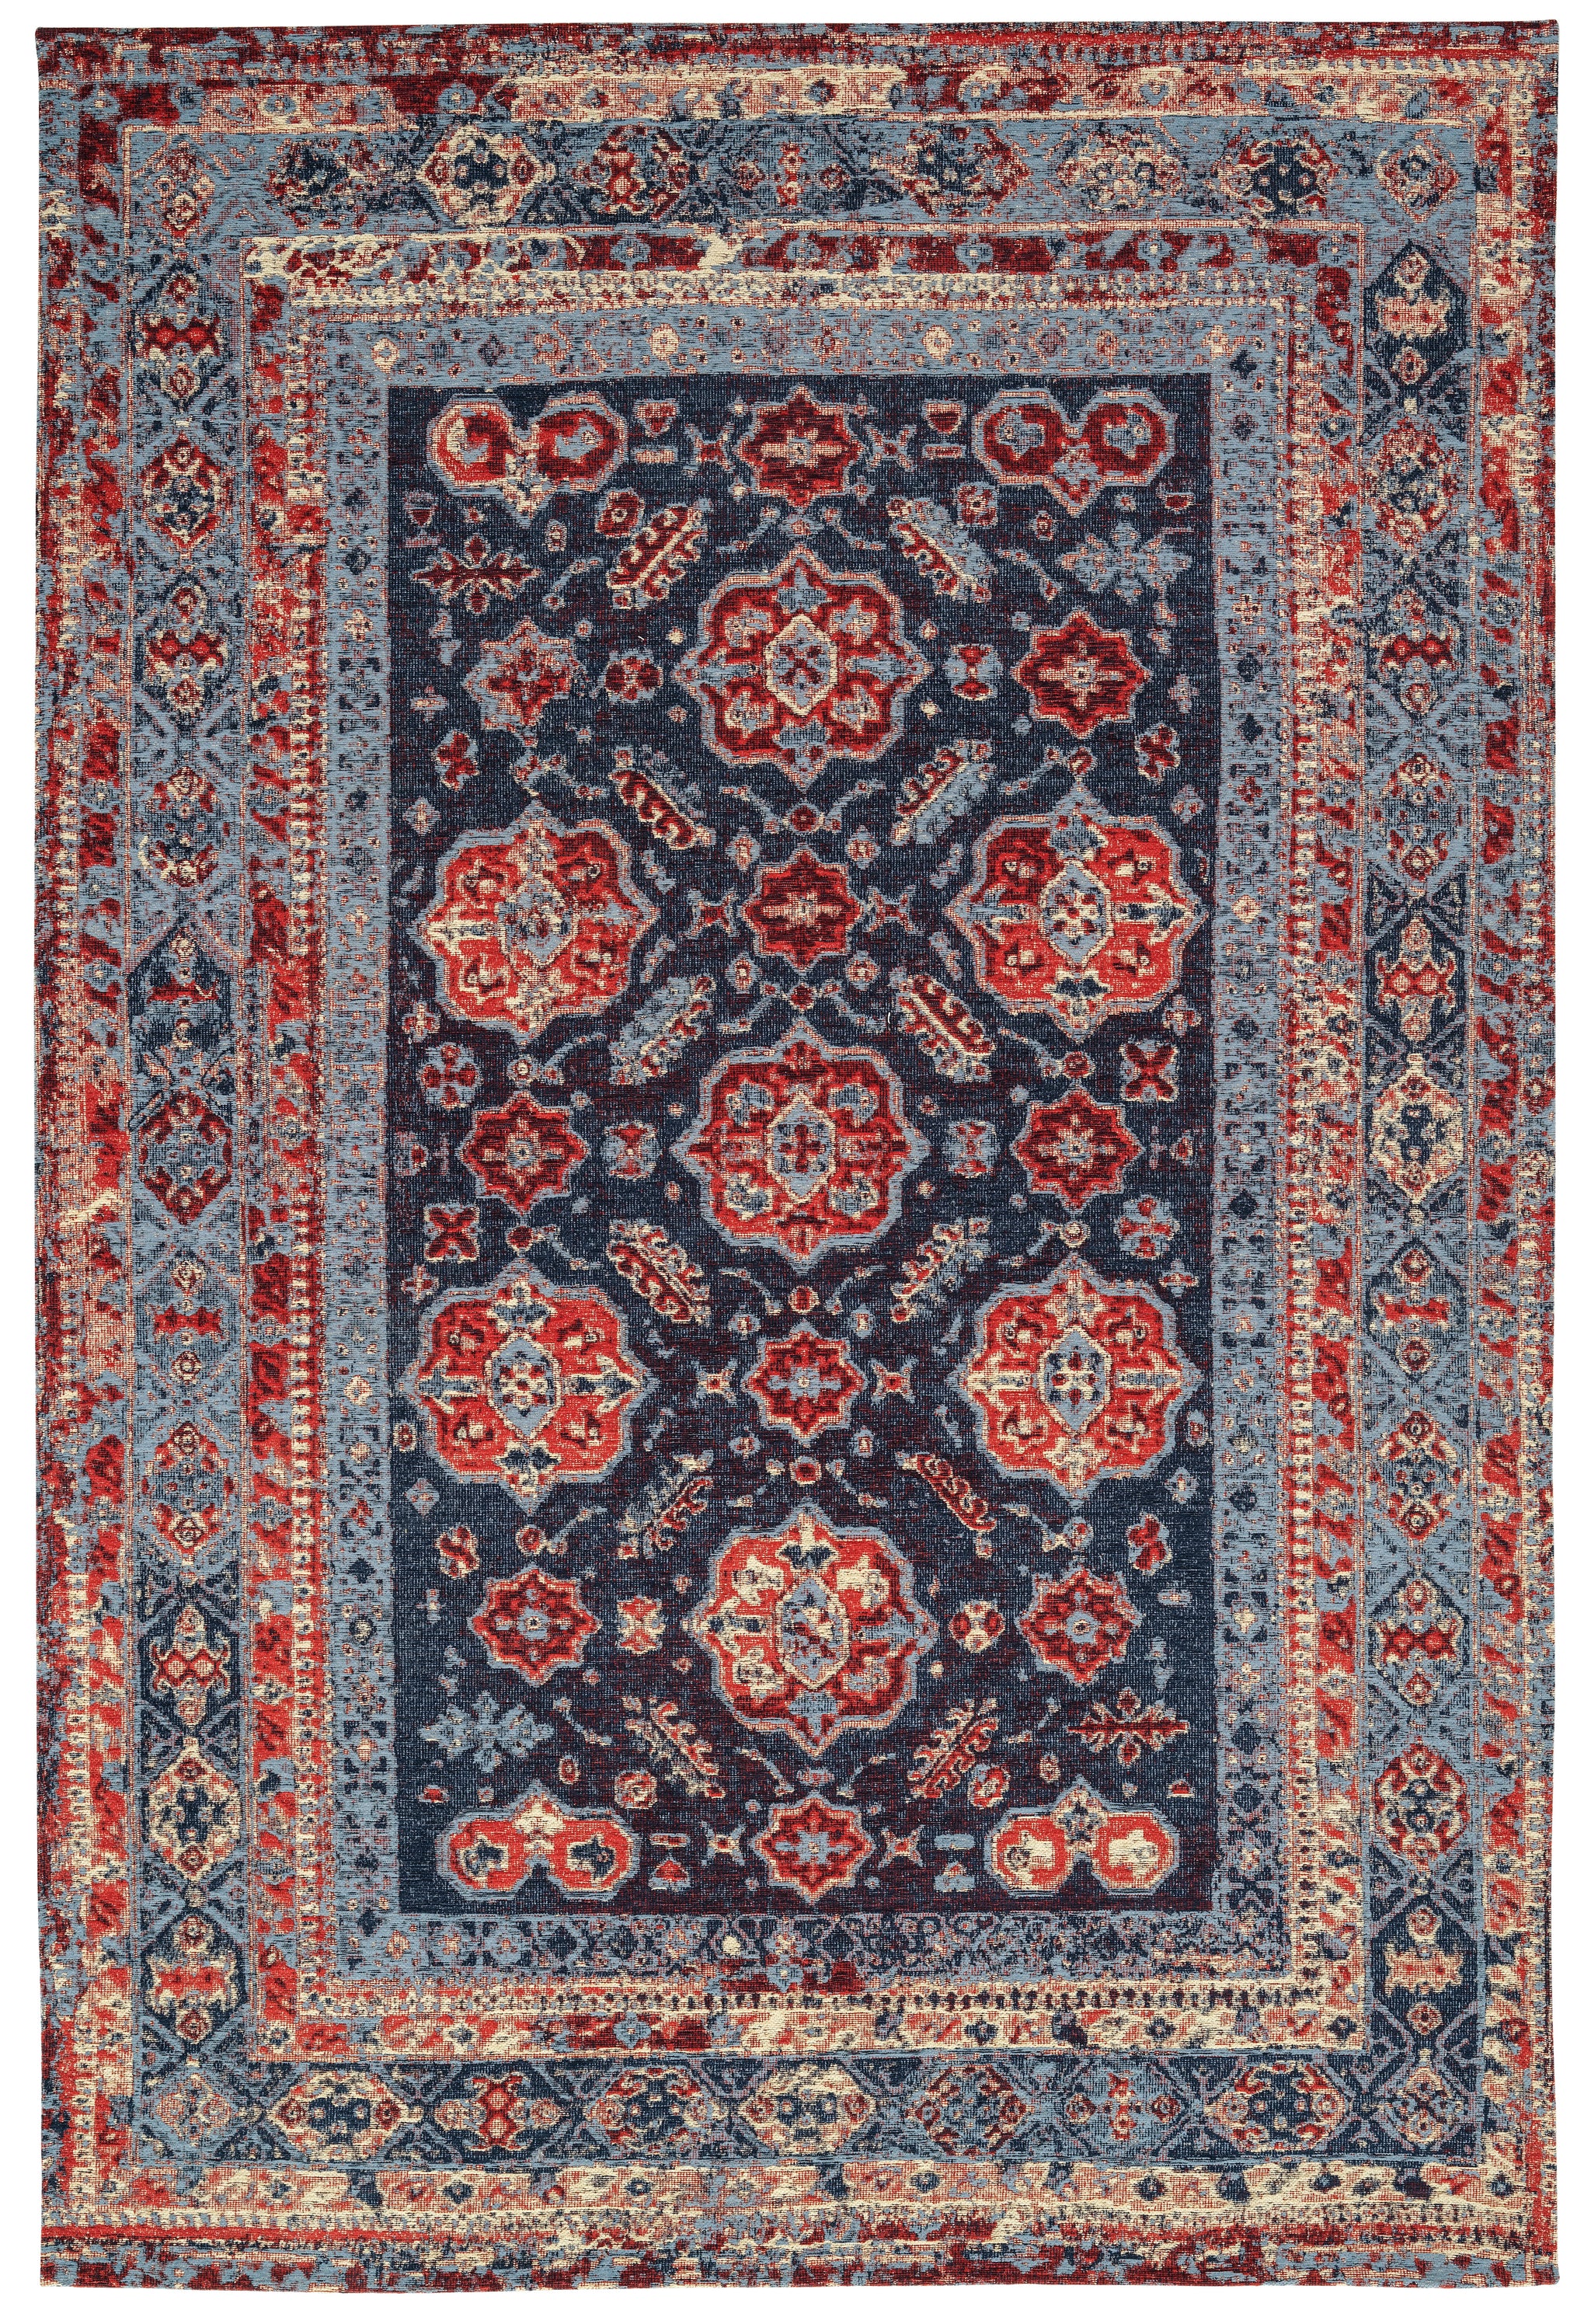 Machine Washable Rugs 5\'x8\', Mother Jacquard Sultan 8\'x10\' – Rug Ruggers Blue/Red